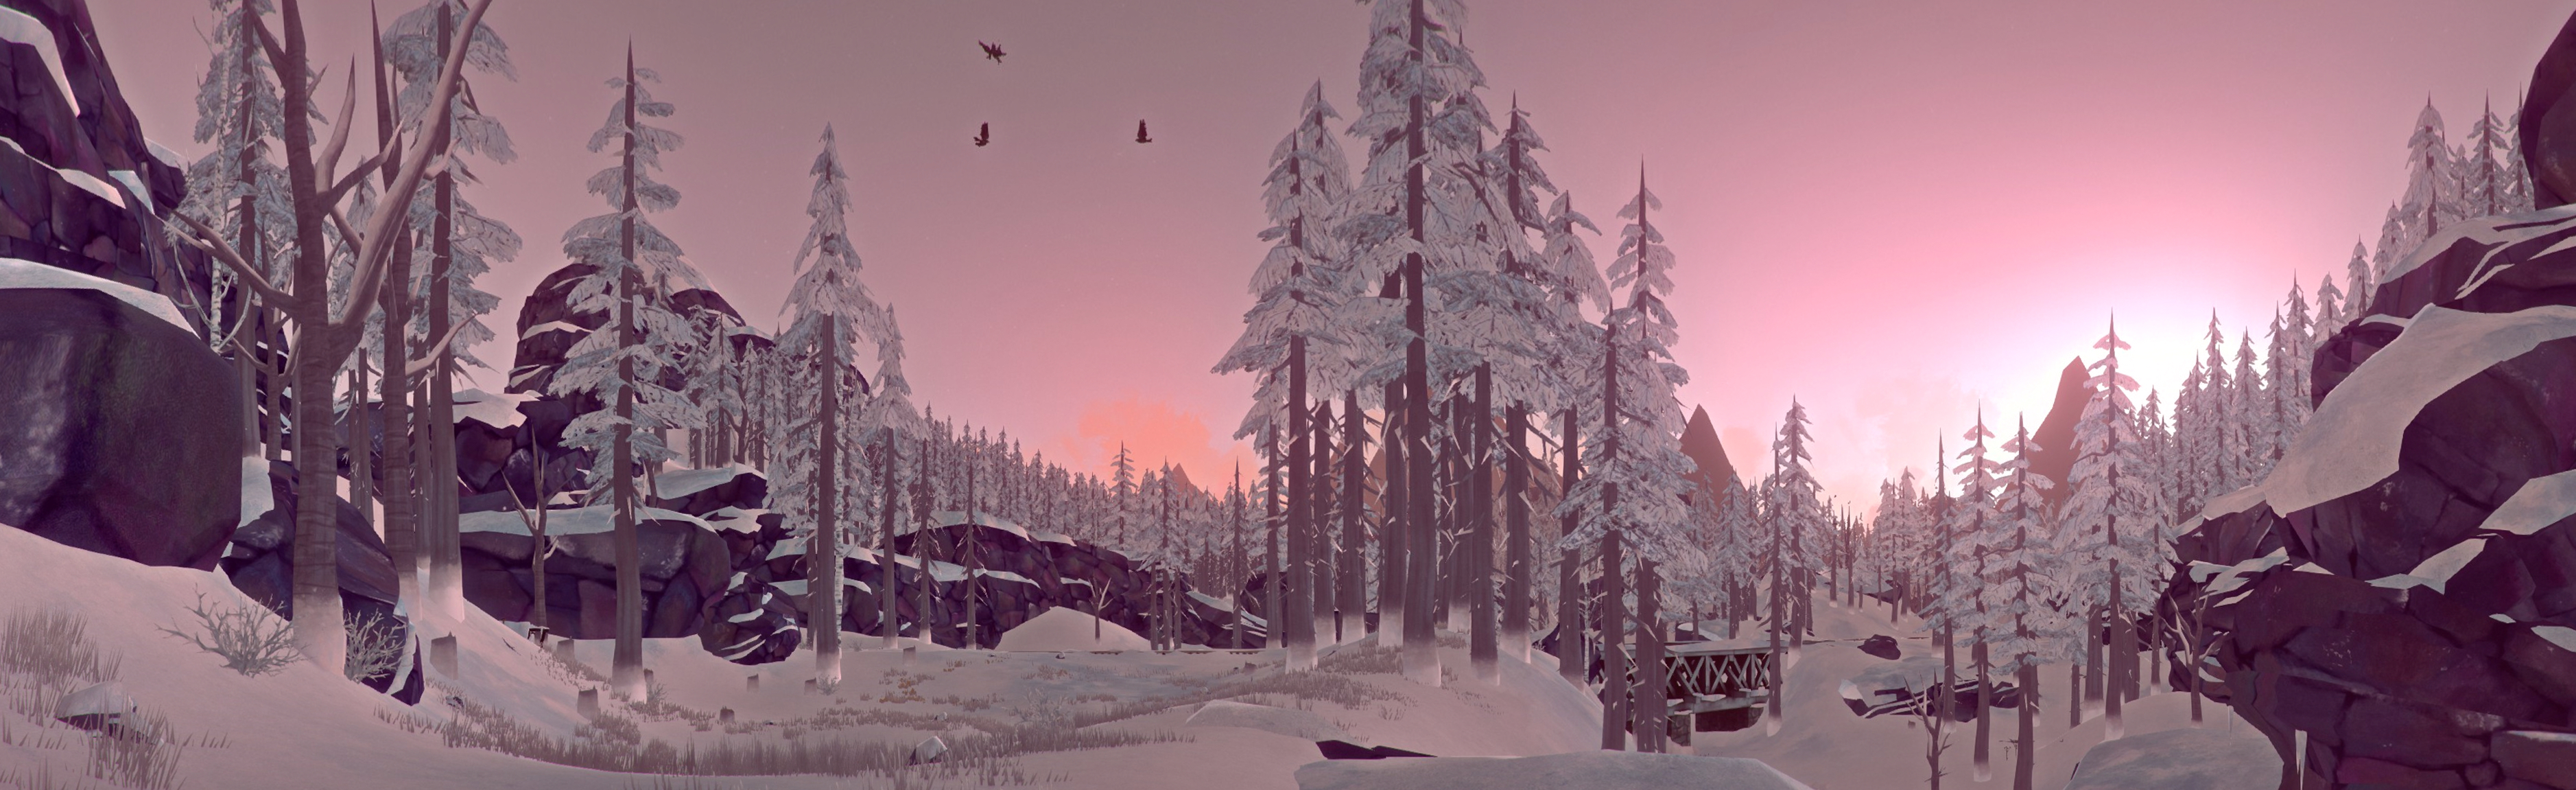 the long dark, video game, forest, wood